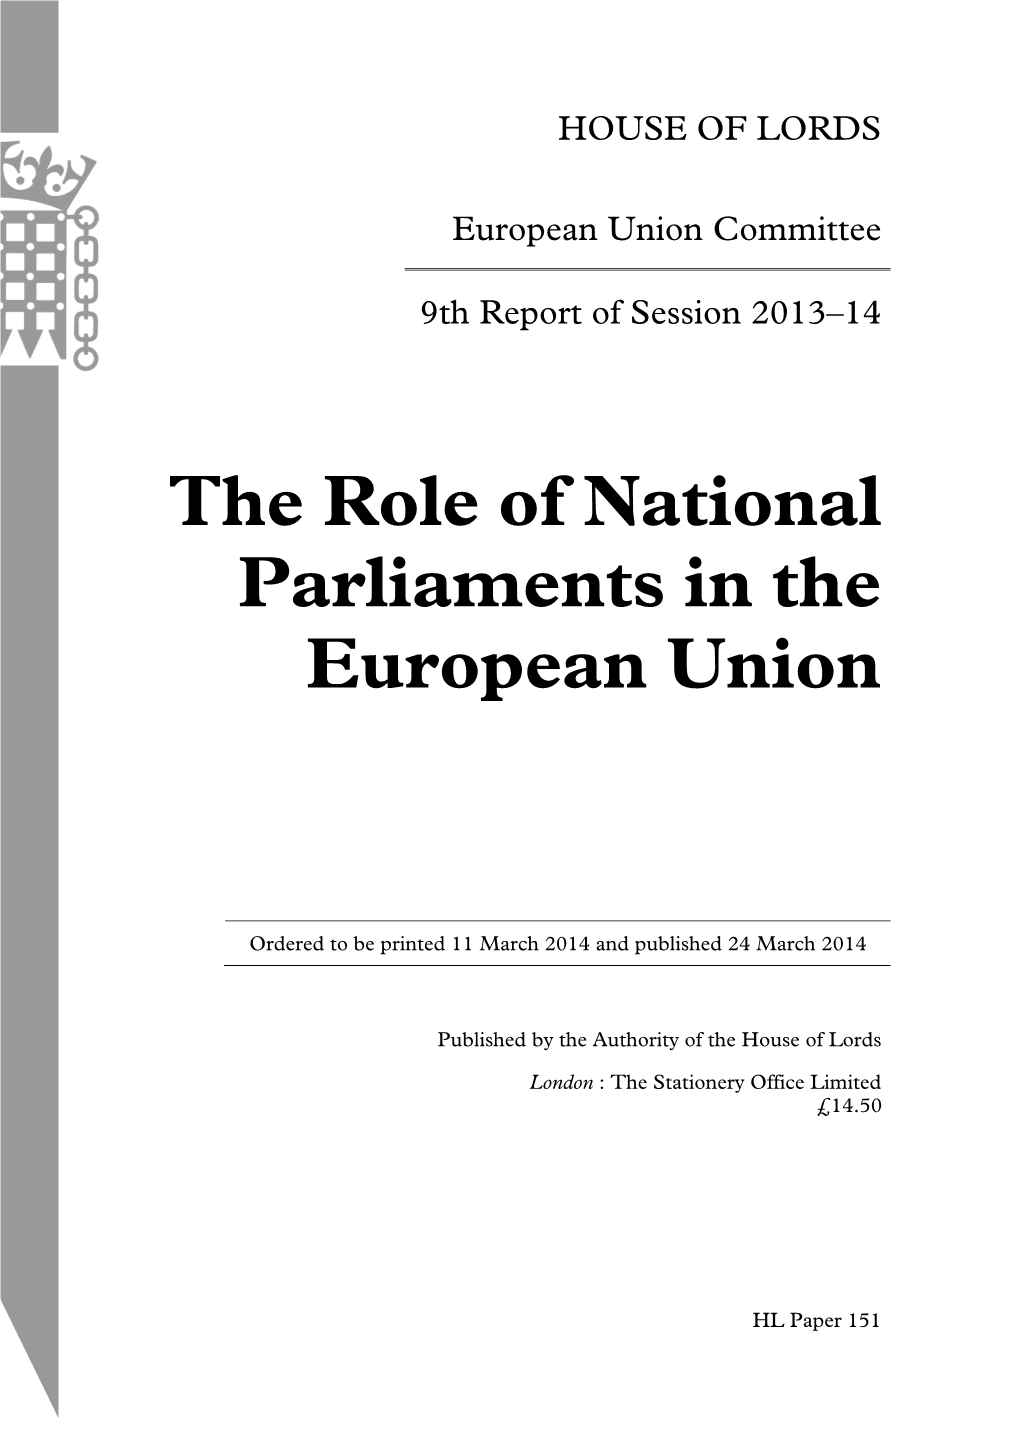 The Role of National Parliaments in the European Union